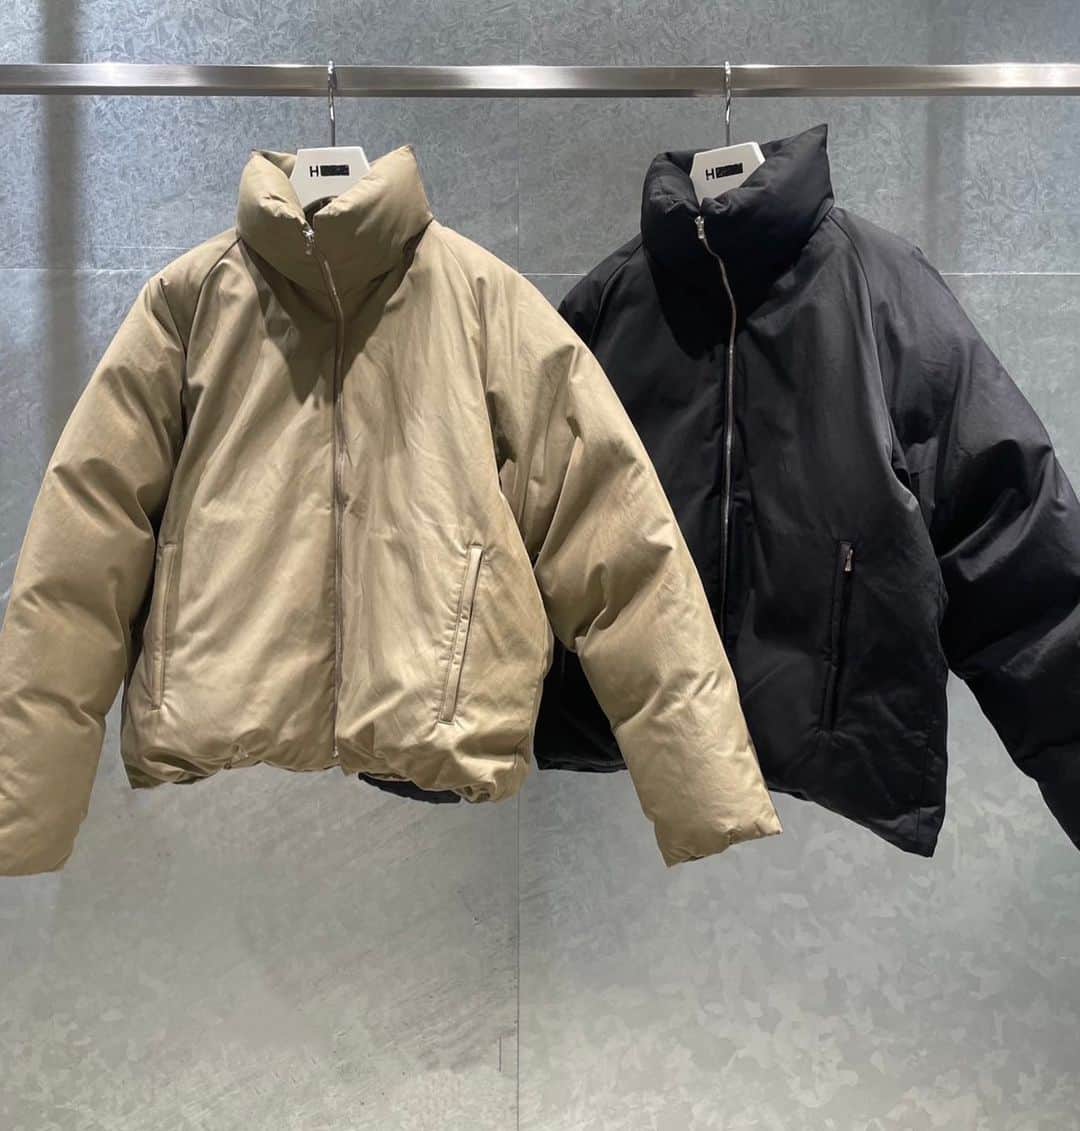 H BEAUTY&YOUTHのインスタグラム：「＜H BEAUTY&YOUTH＞ OLMETEX HAPPY SUIT DOWN ¥79,200 Color: BEIGE/BLACK Size: S/M/L  FLEECE GABAGE M65 ¥25,300 Color: MD.BROWN/DK.GRAY Size: S/M/L  #H_beautyandyouth #エイチビューティアンドユース @h_beautyandyouth  #BEAUTYANDYOUTH #ビューティアンドユース #Unitedarrows #ユナイテッドアローズ」